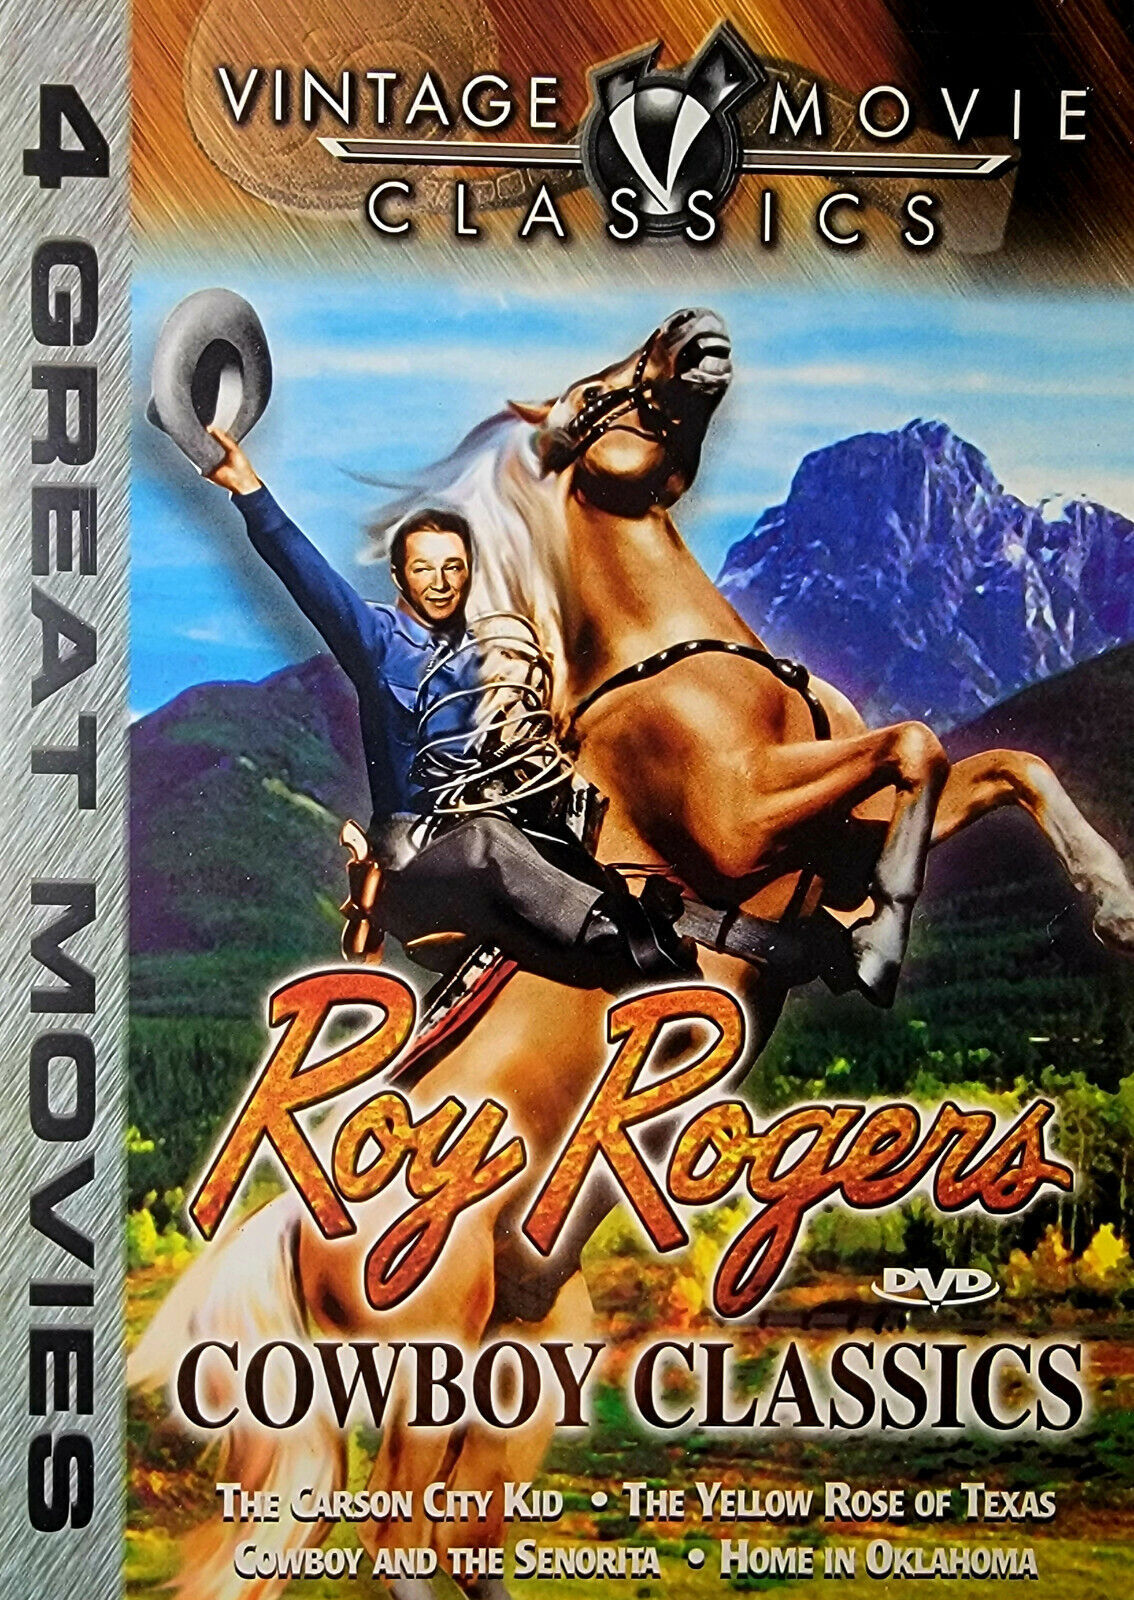 Roy Rogers Cowboy Classics DVD Set (4) 1940's Vintage Western Movies NEW SEALED